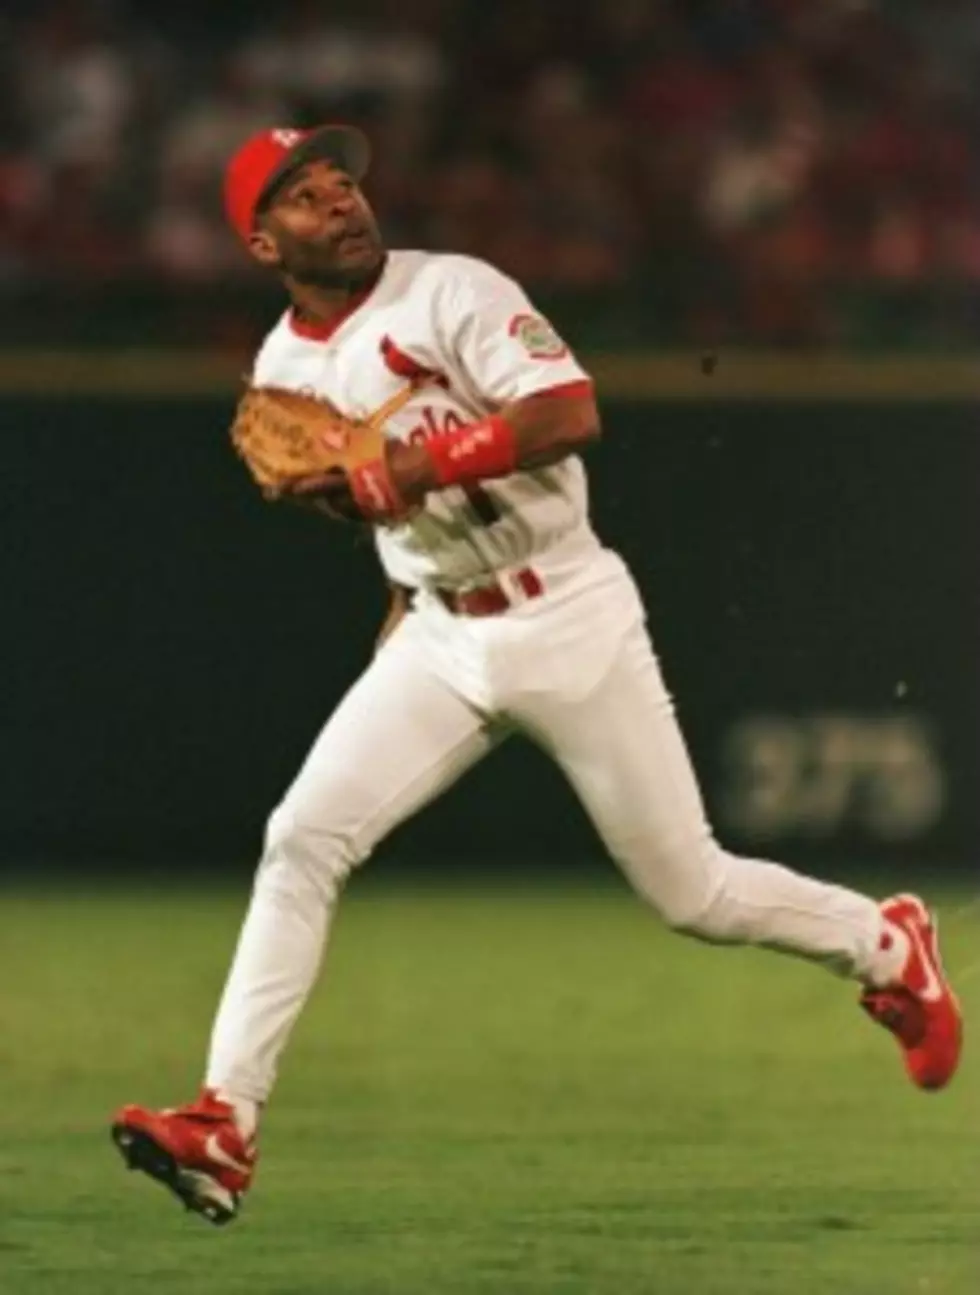 Ozzie Smith Returns to Cooperstown for PLAY Ball Fundraiser